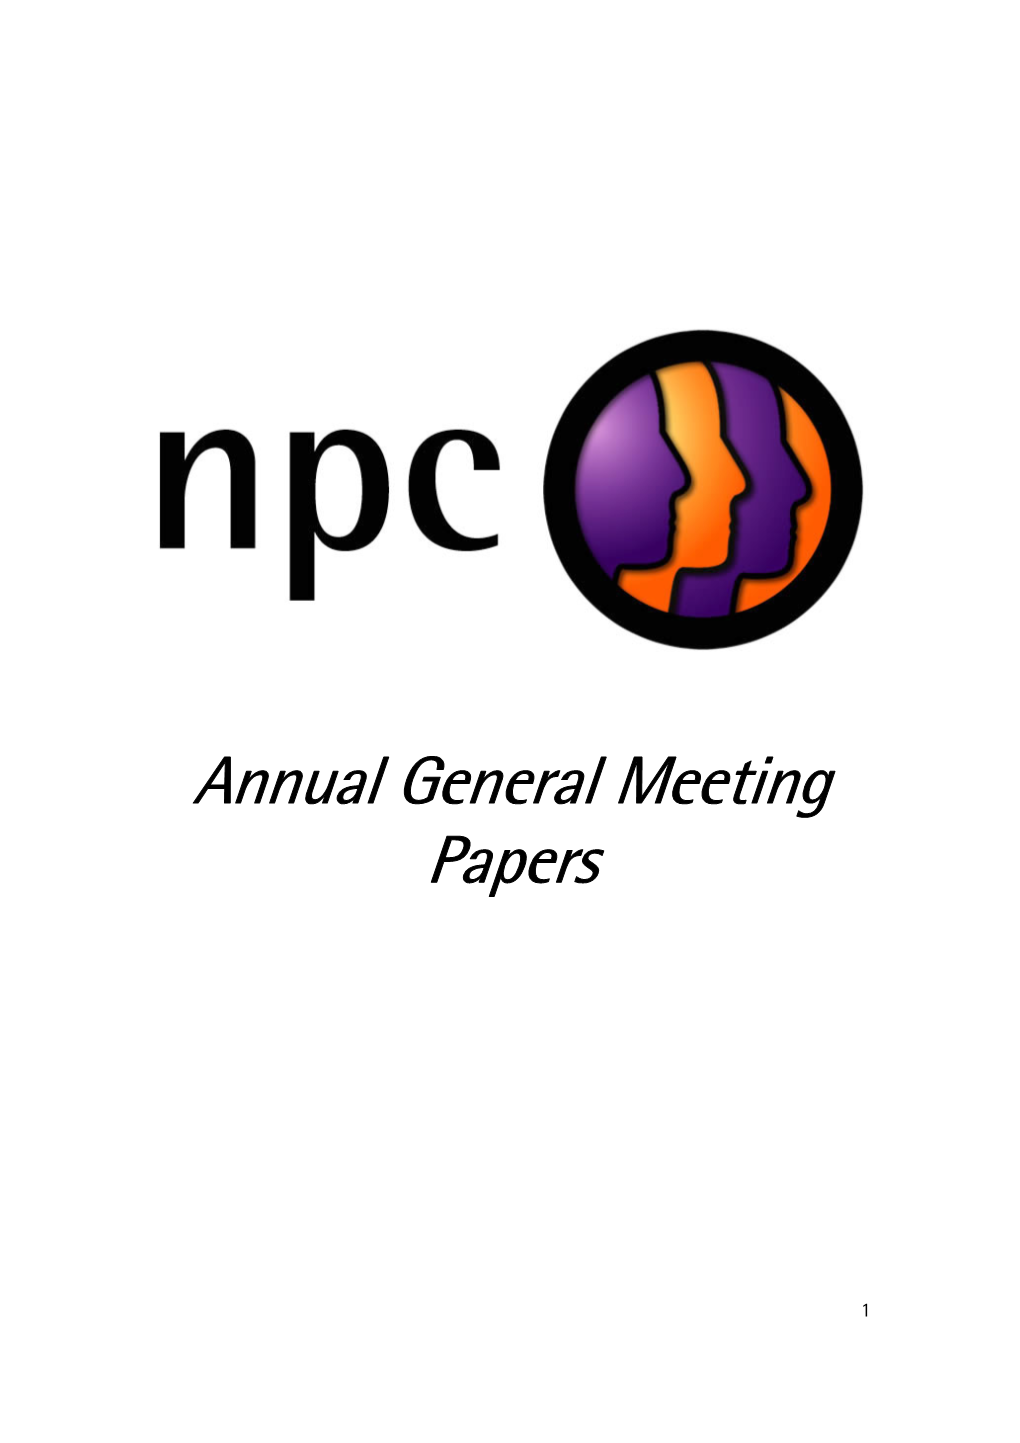 AGM Papers and a Section with Consultation Responses